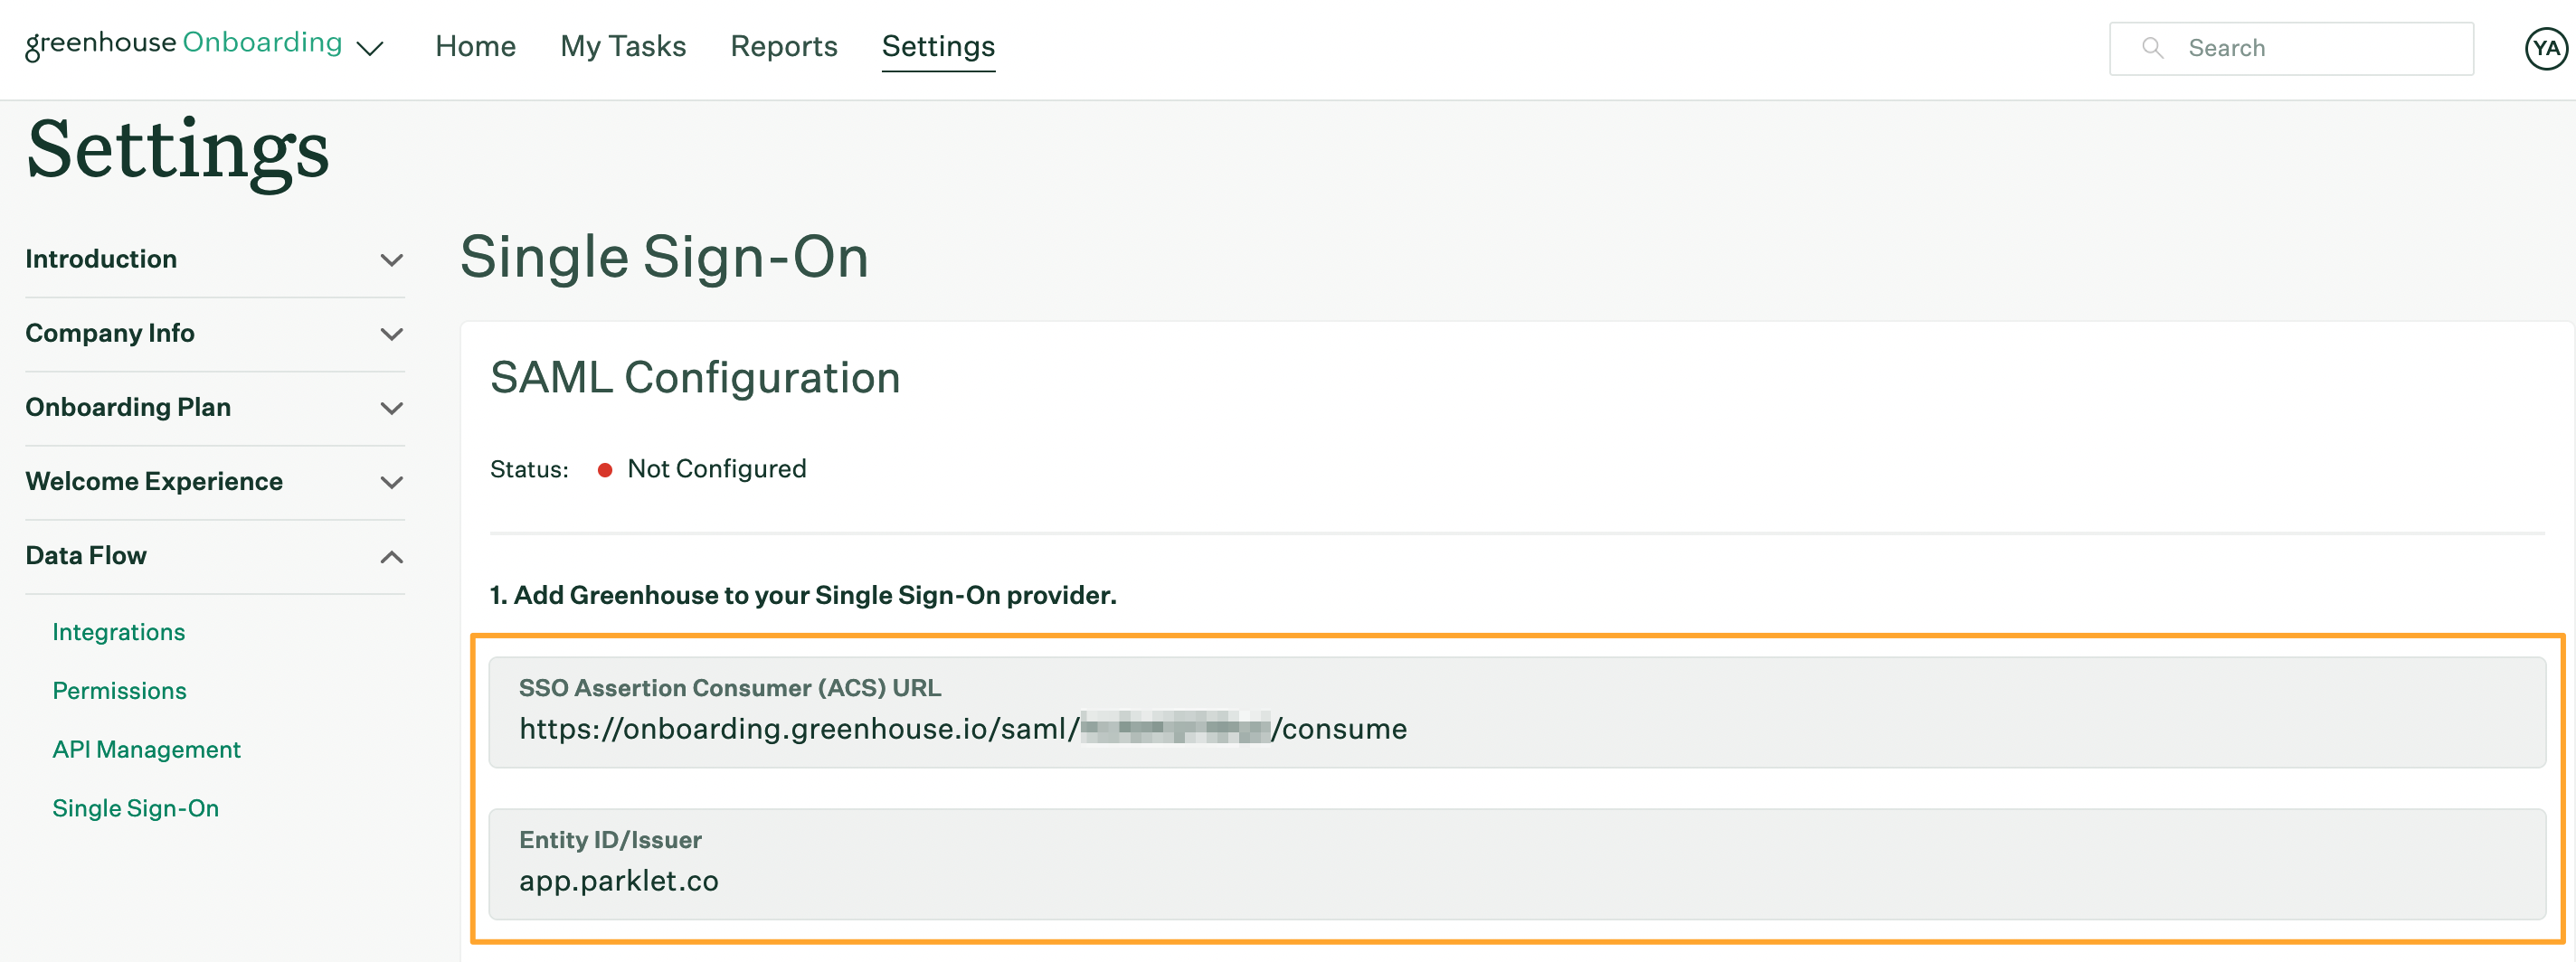 Single Sign On page in Greenhouse Onboarding Settings with Step One credentials highlighted